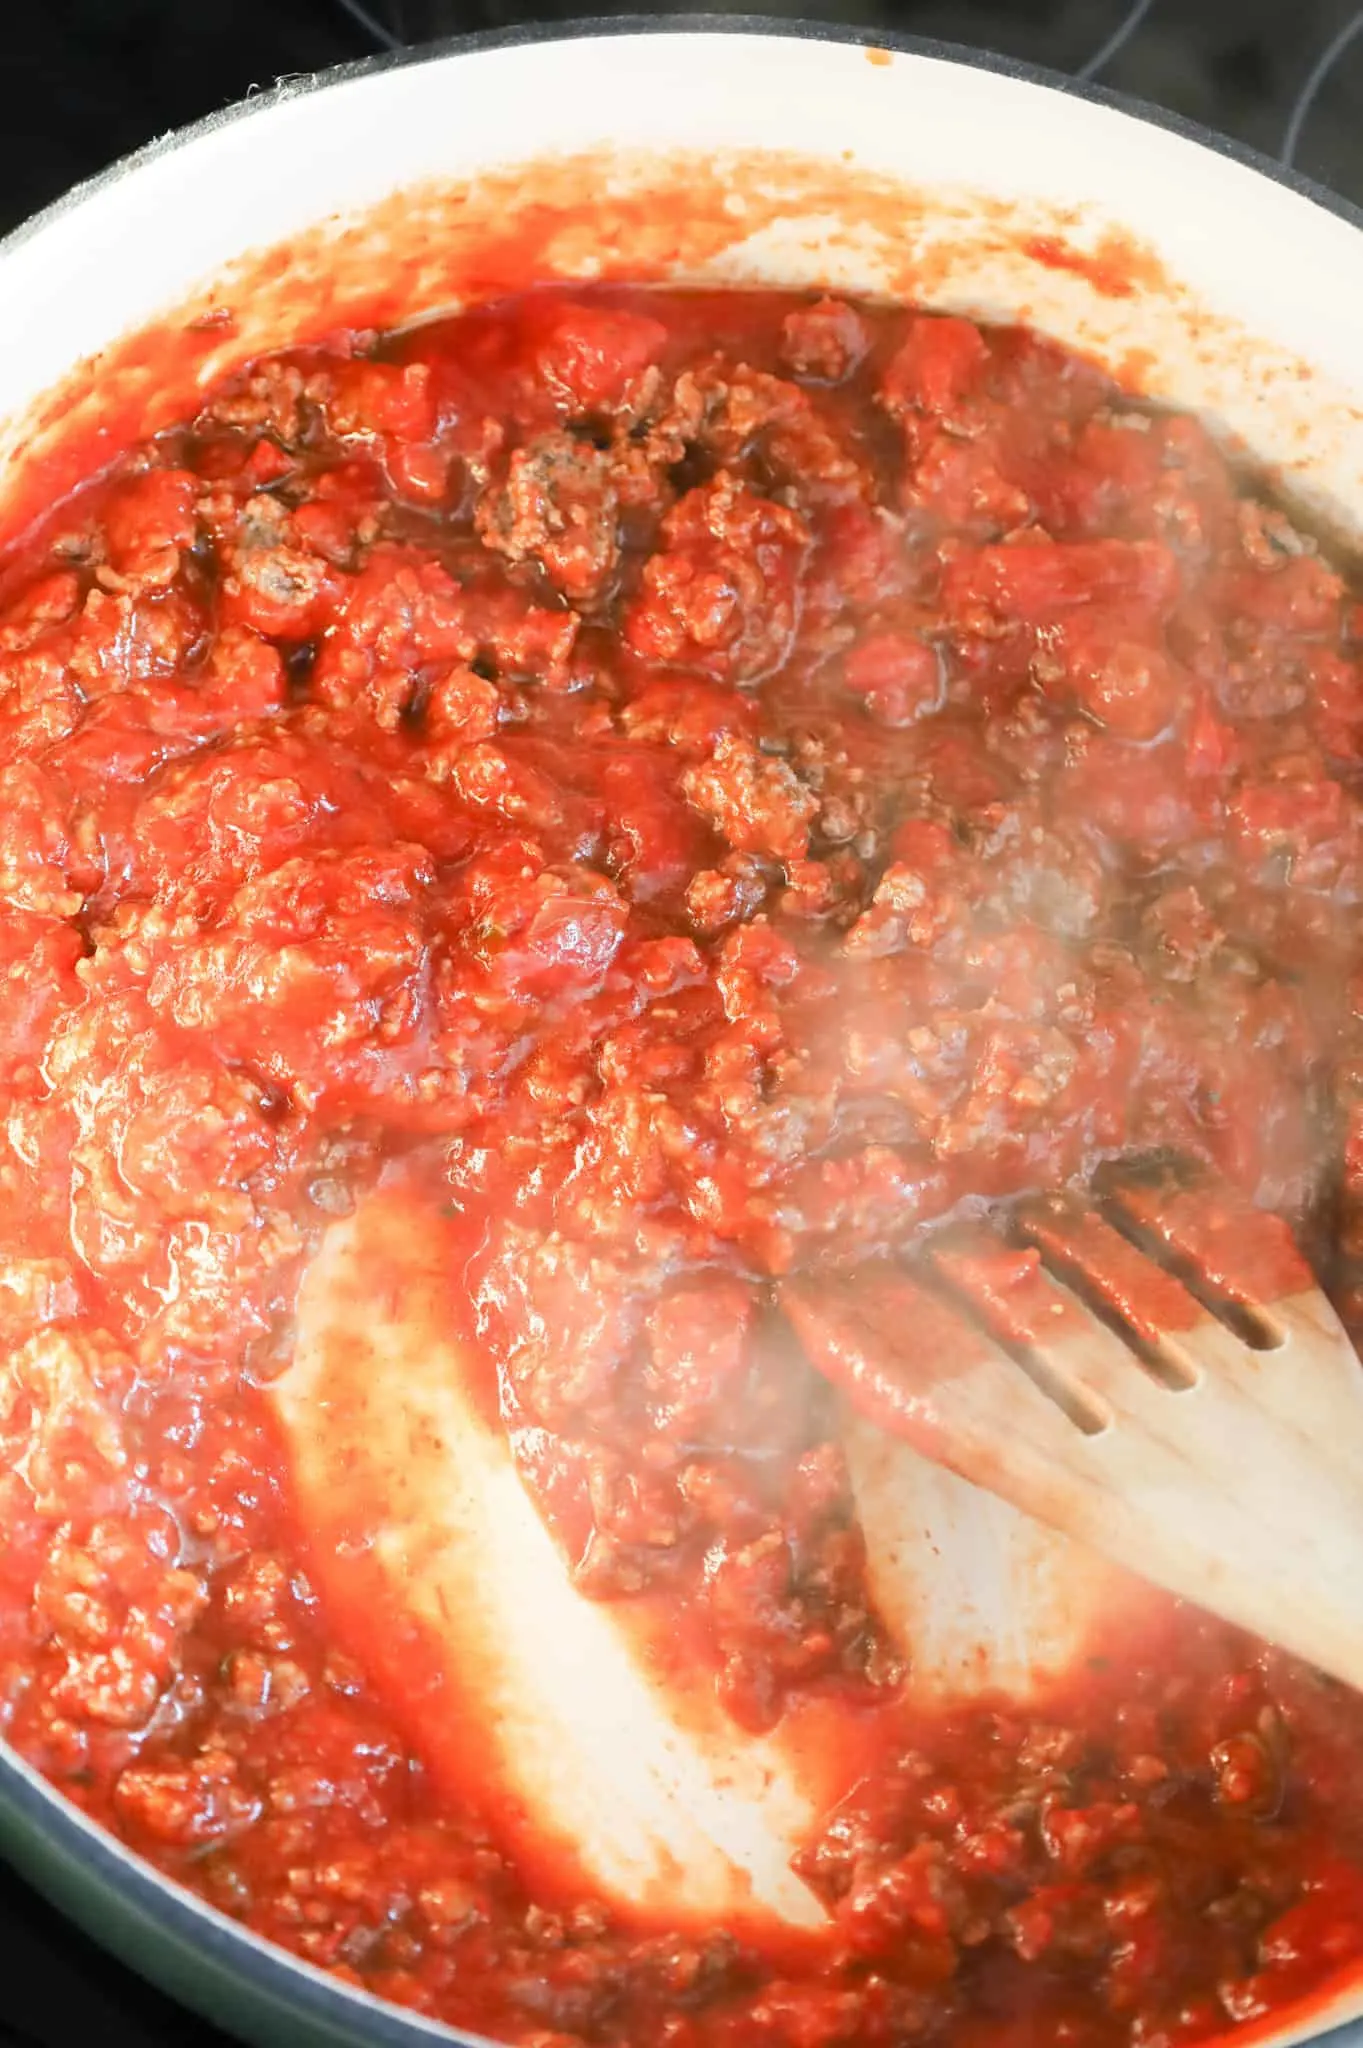 marinara, spices and ground beef mixture in a skillet